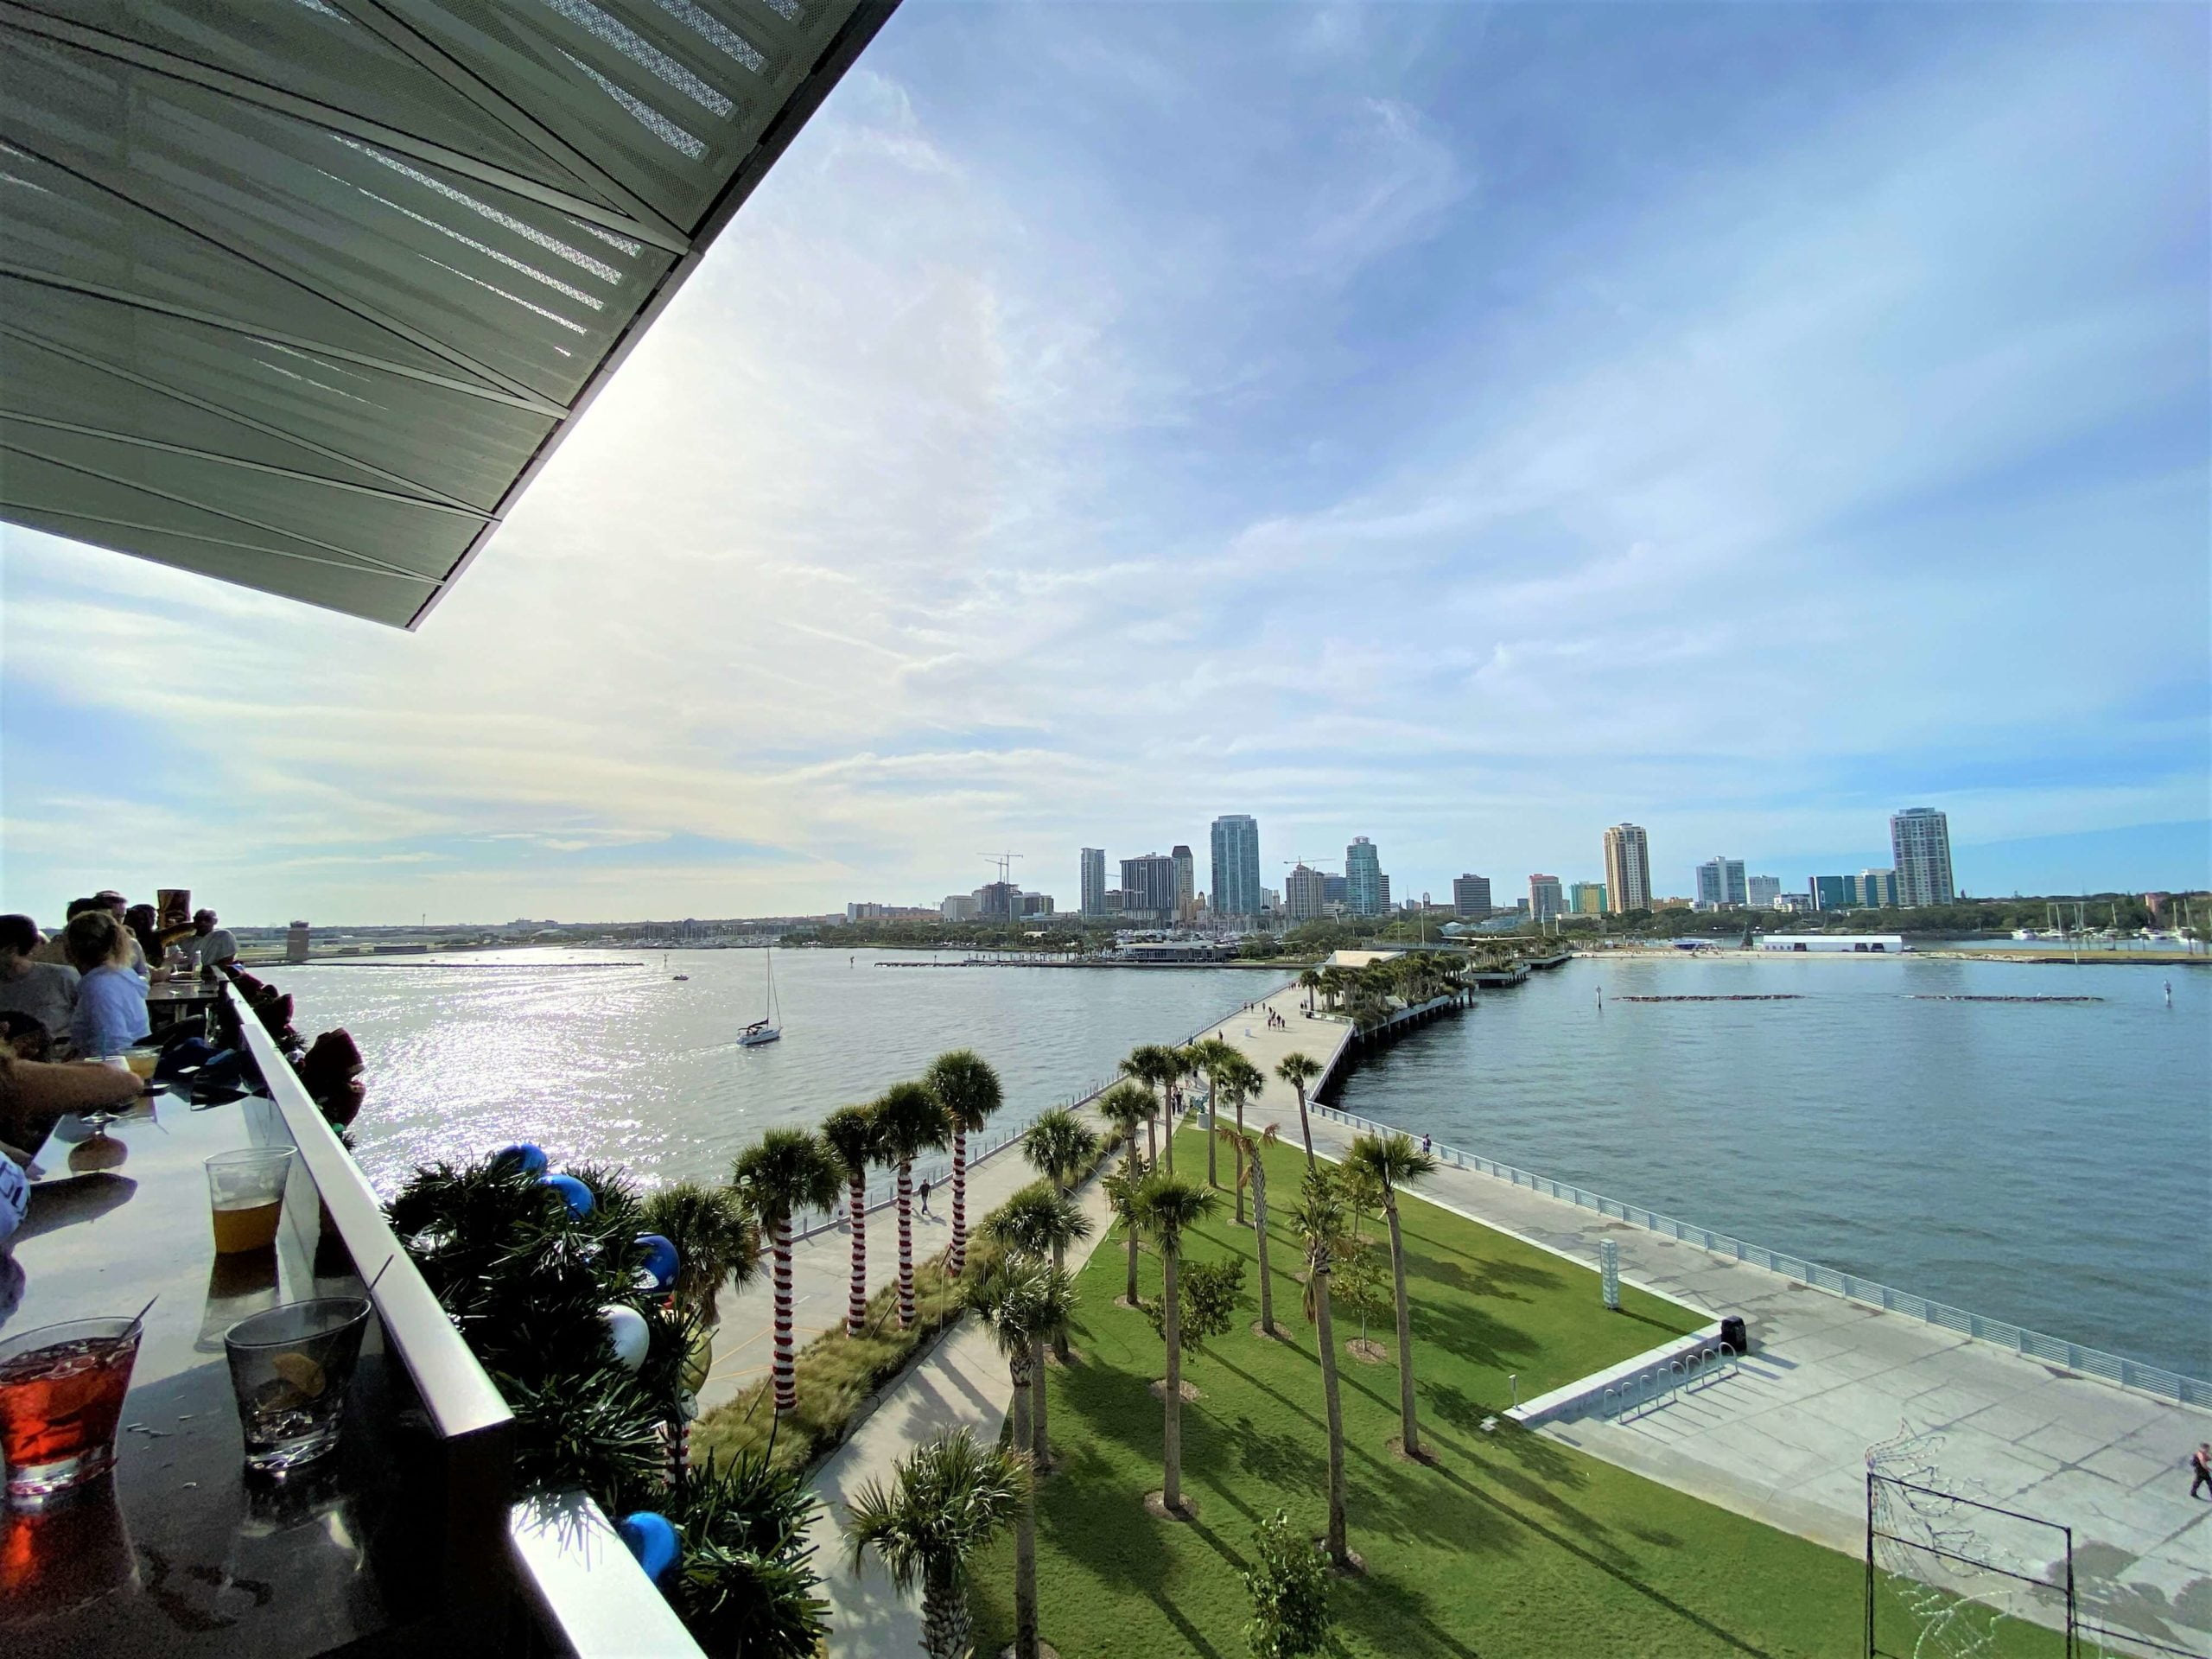 View of St. Pete Pier from Pier Teaki includes a green lawn and palm trees in the foreground, the long St. Pete pier in the middle, and the city scape of St. Petersburg Florida in the background.